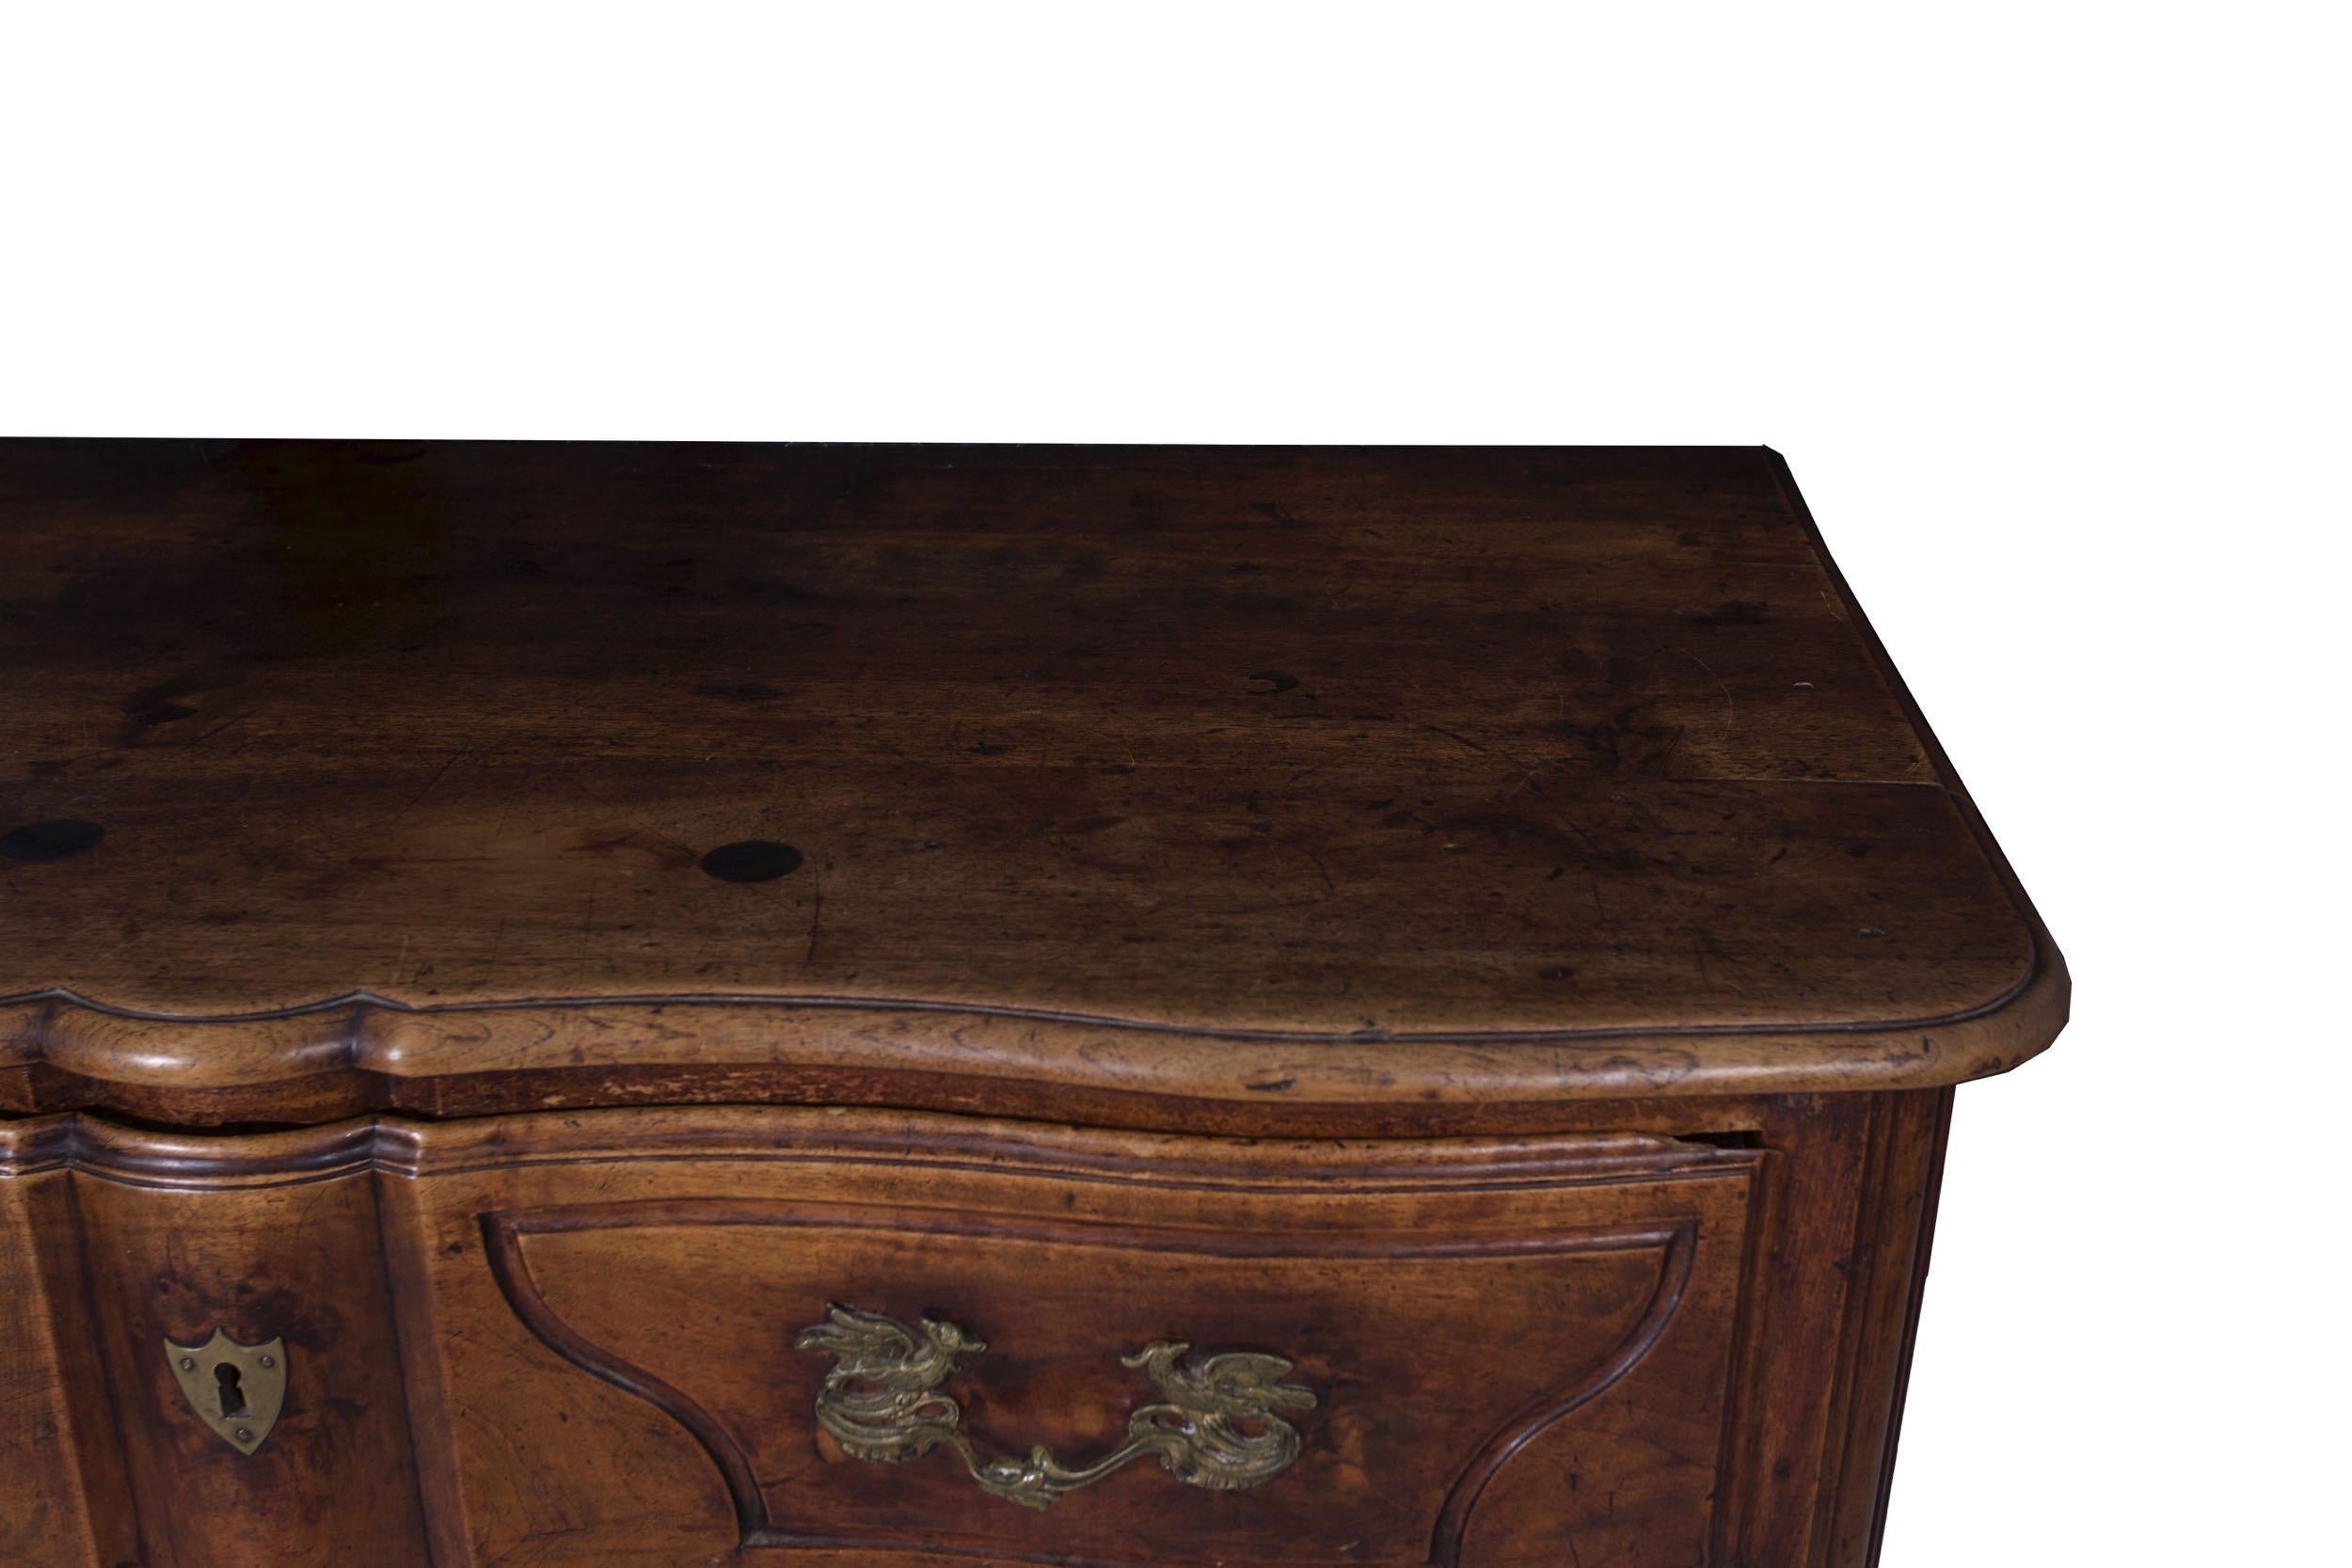 18th Century Regencé Period Walnut Commode Chest of Drawers, circa 1730-1750 For Sale 11